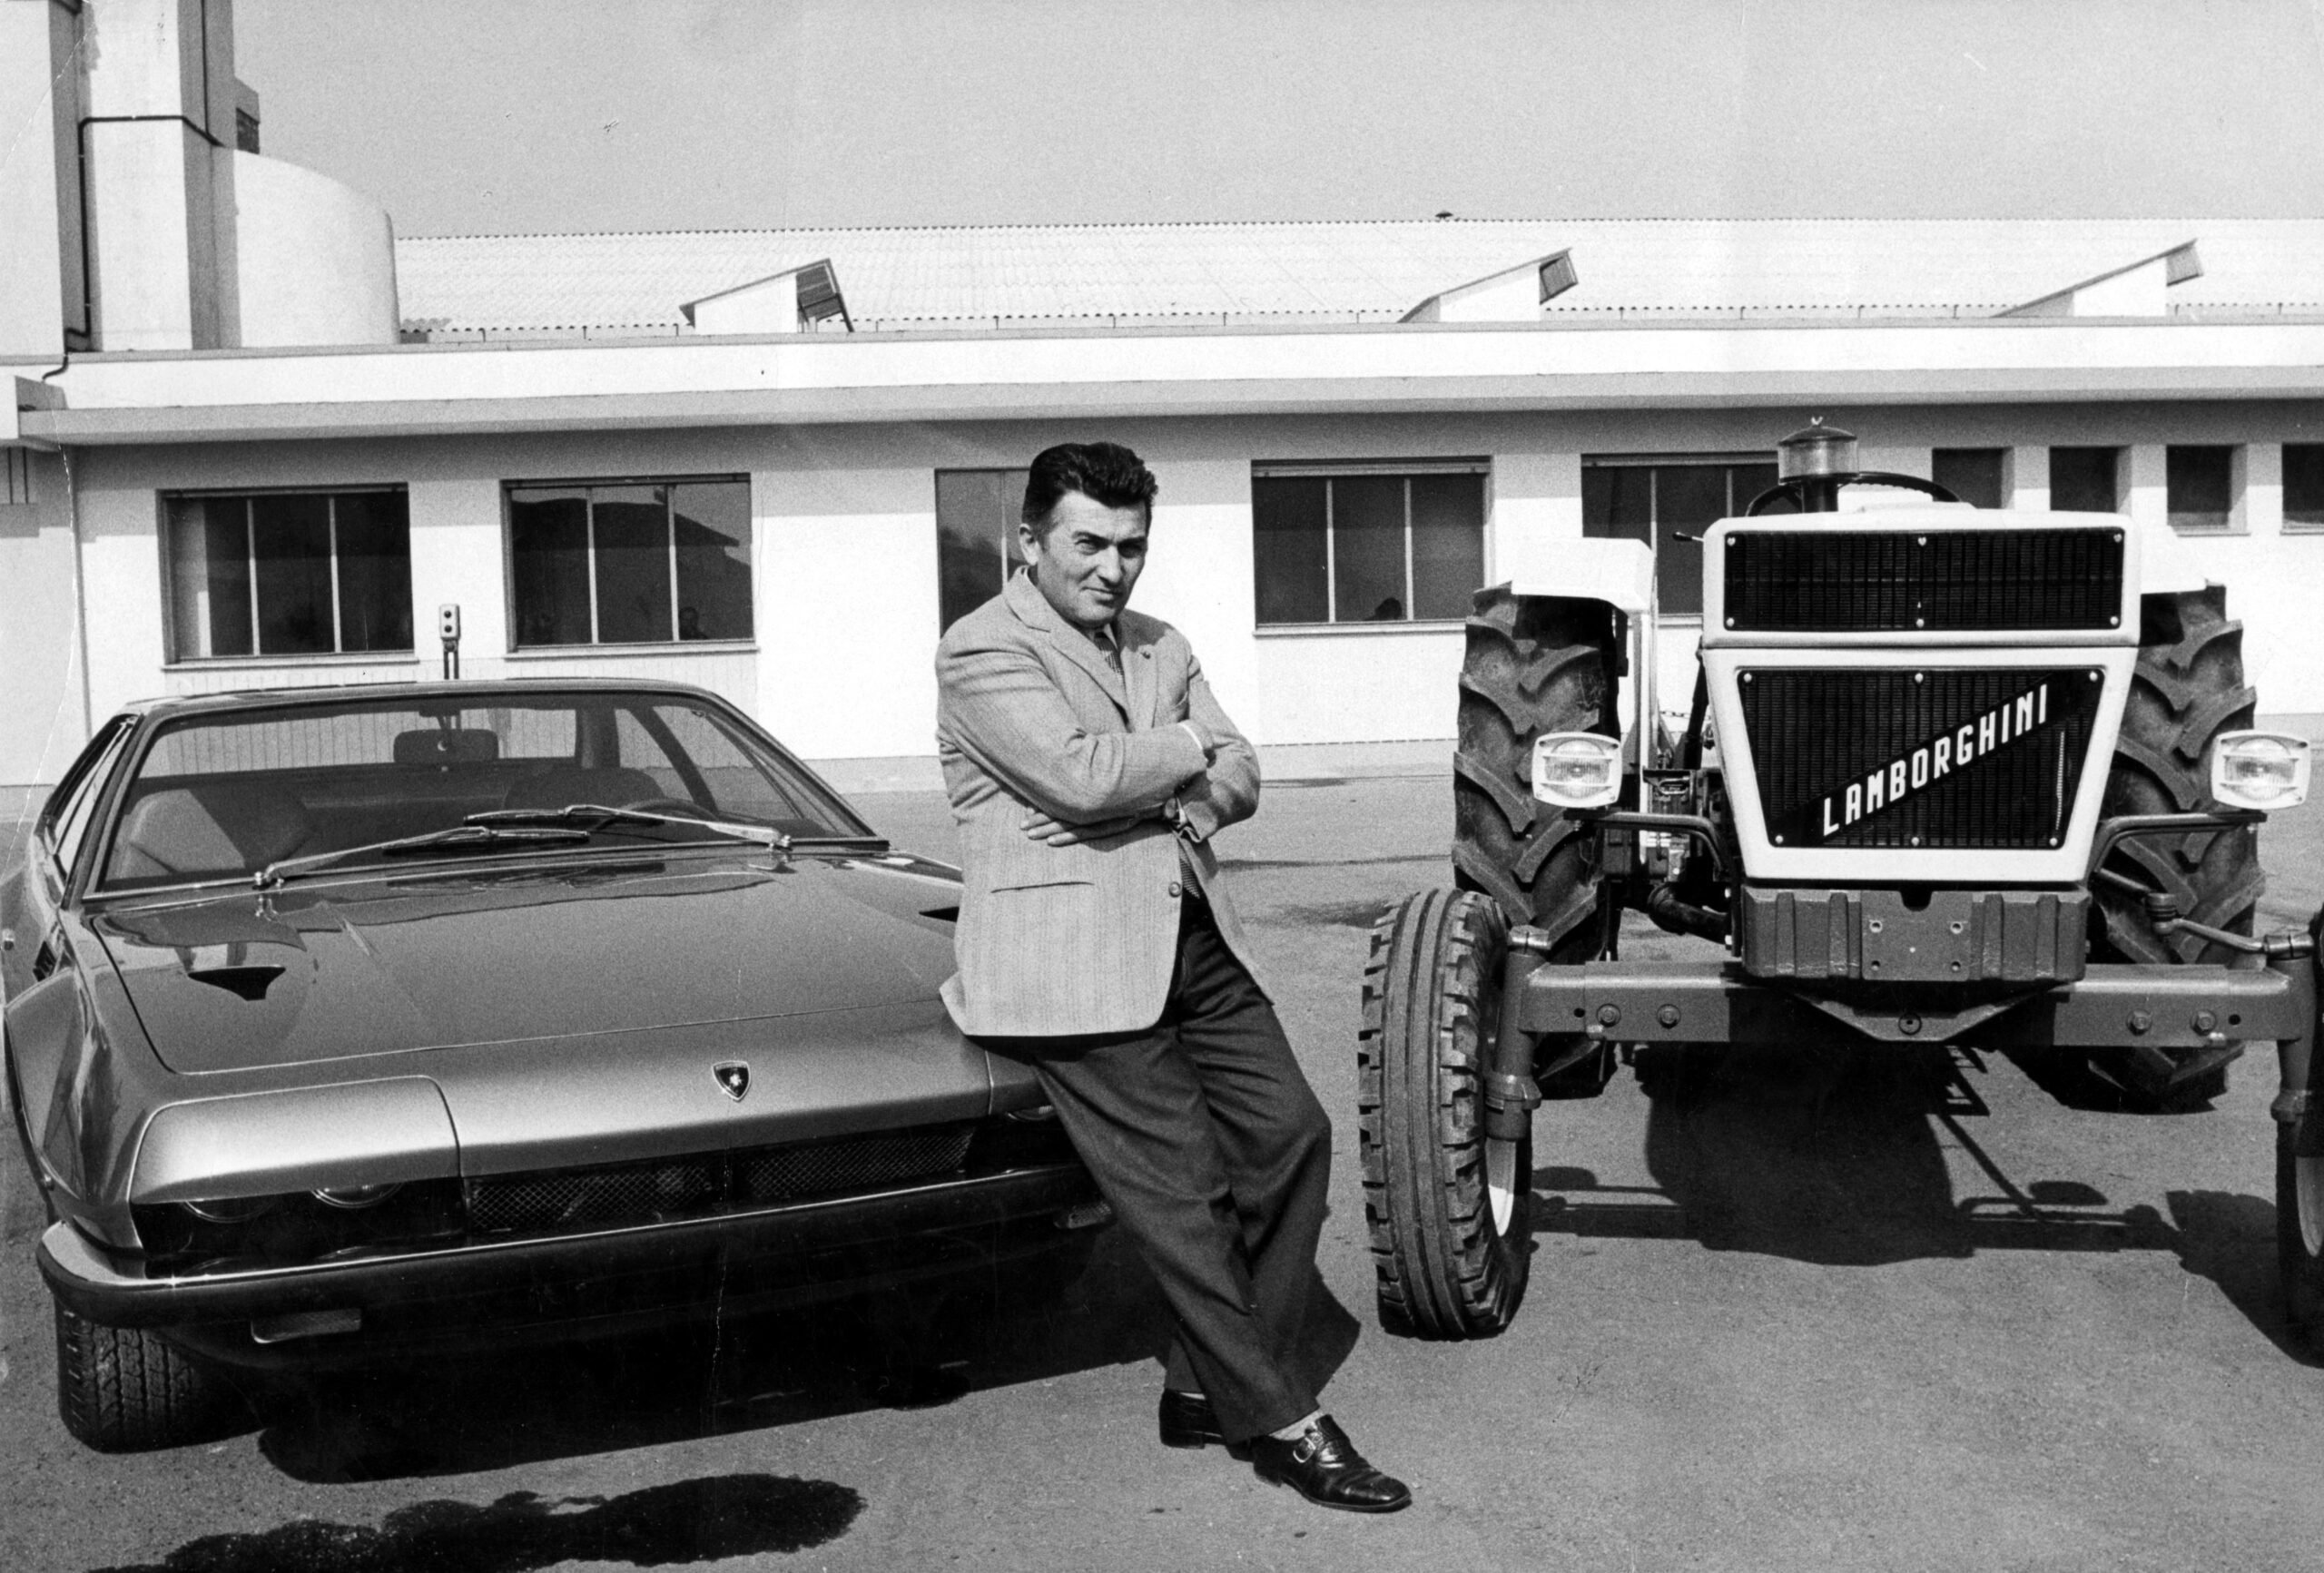 An old photo of Ferruccio Lamborghini with a tractor and car bearing his name.